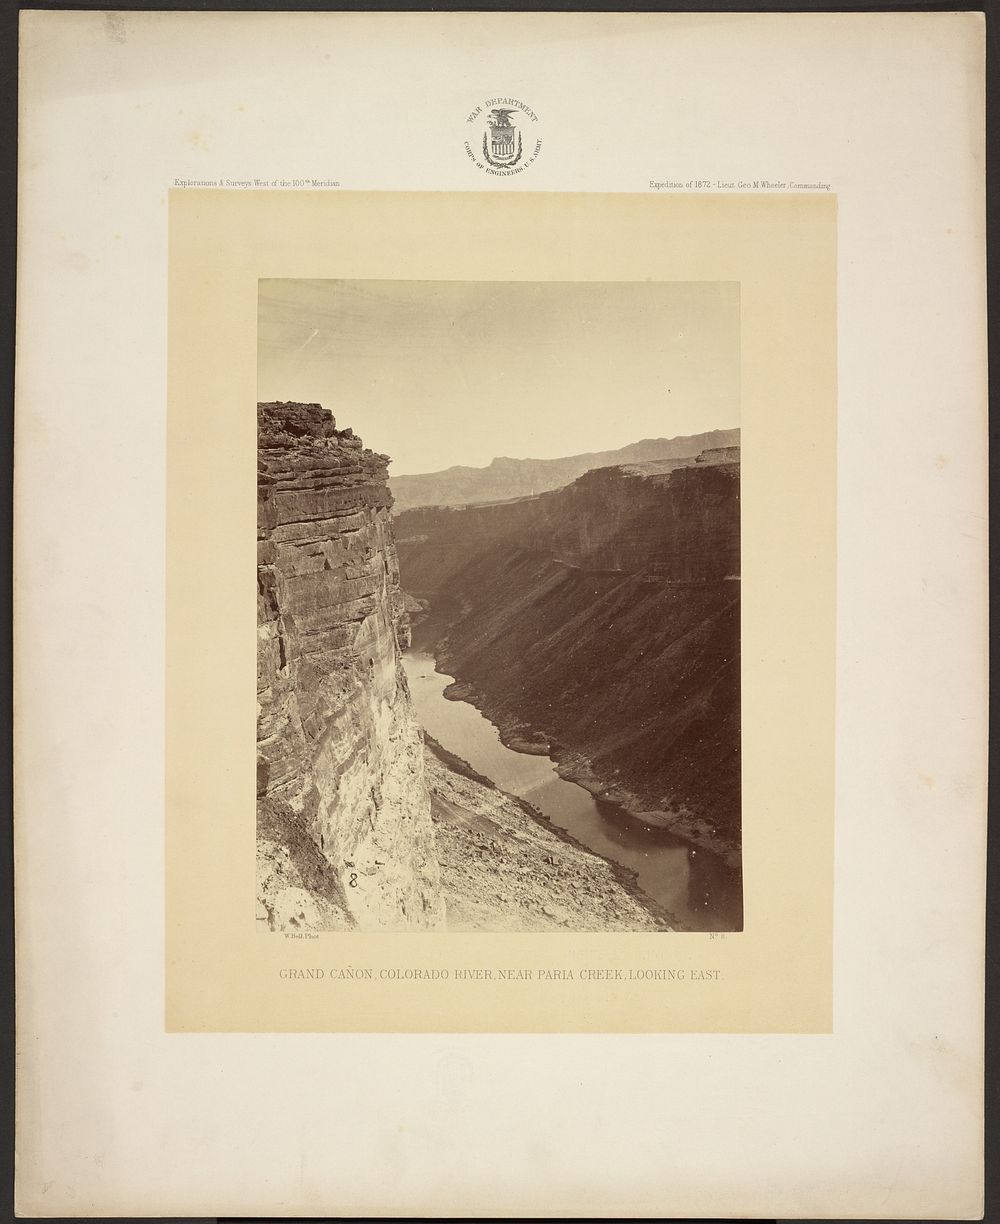 Grand Cañon, Colorado River, Near Paria Creek, Looking East by William H Bell